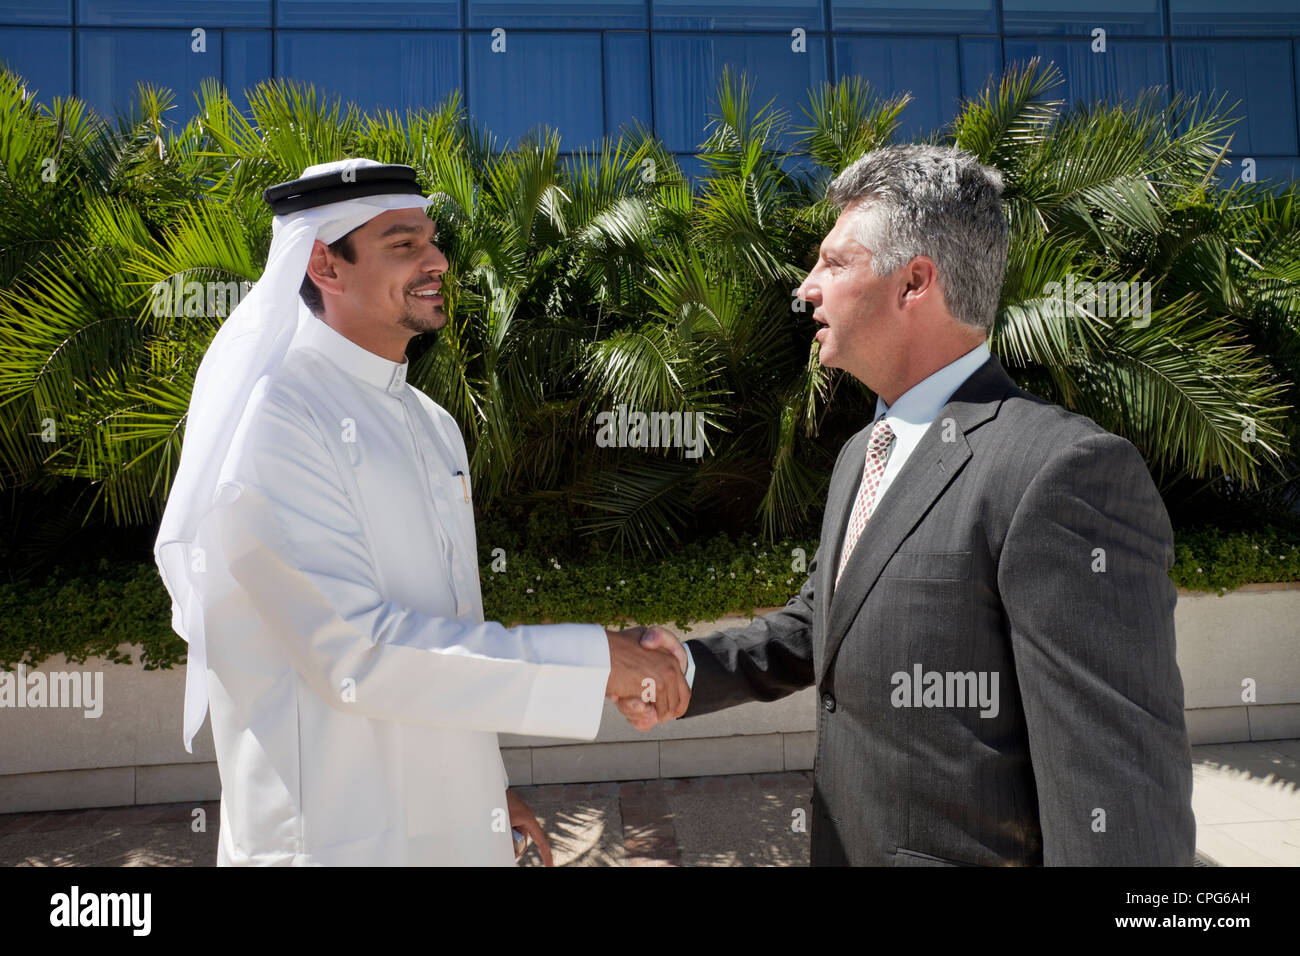 Arab businessman and western businessman shaking hands in front of office building. Stock Photo